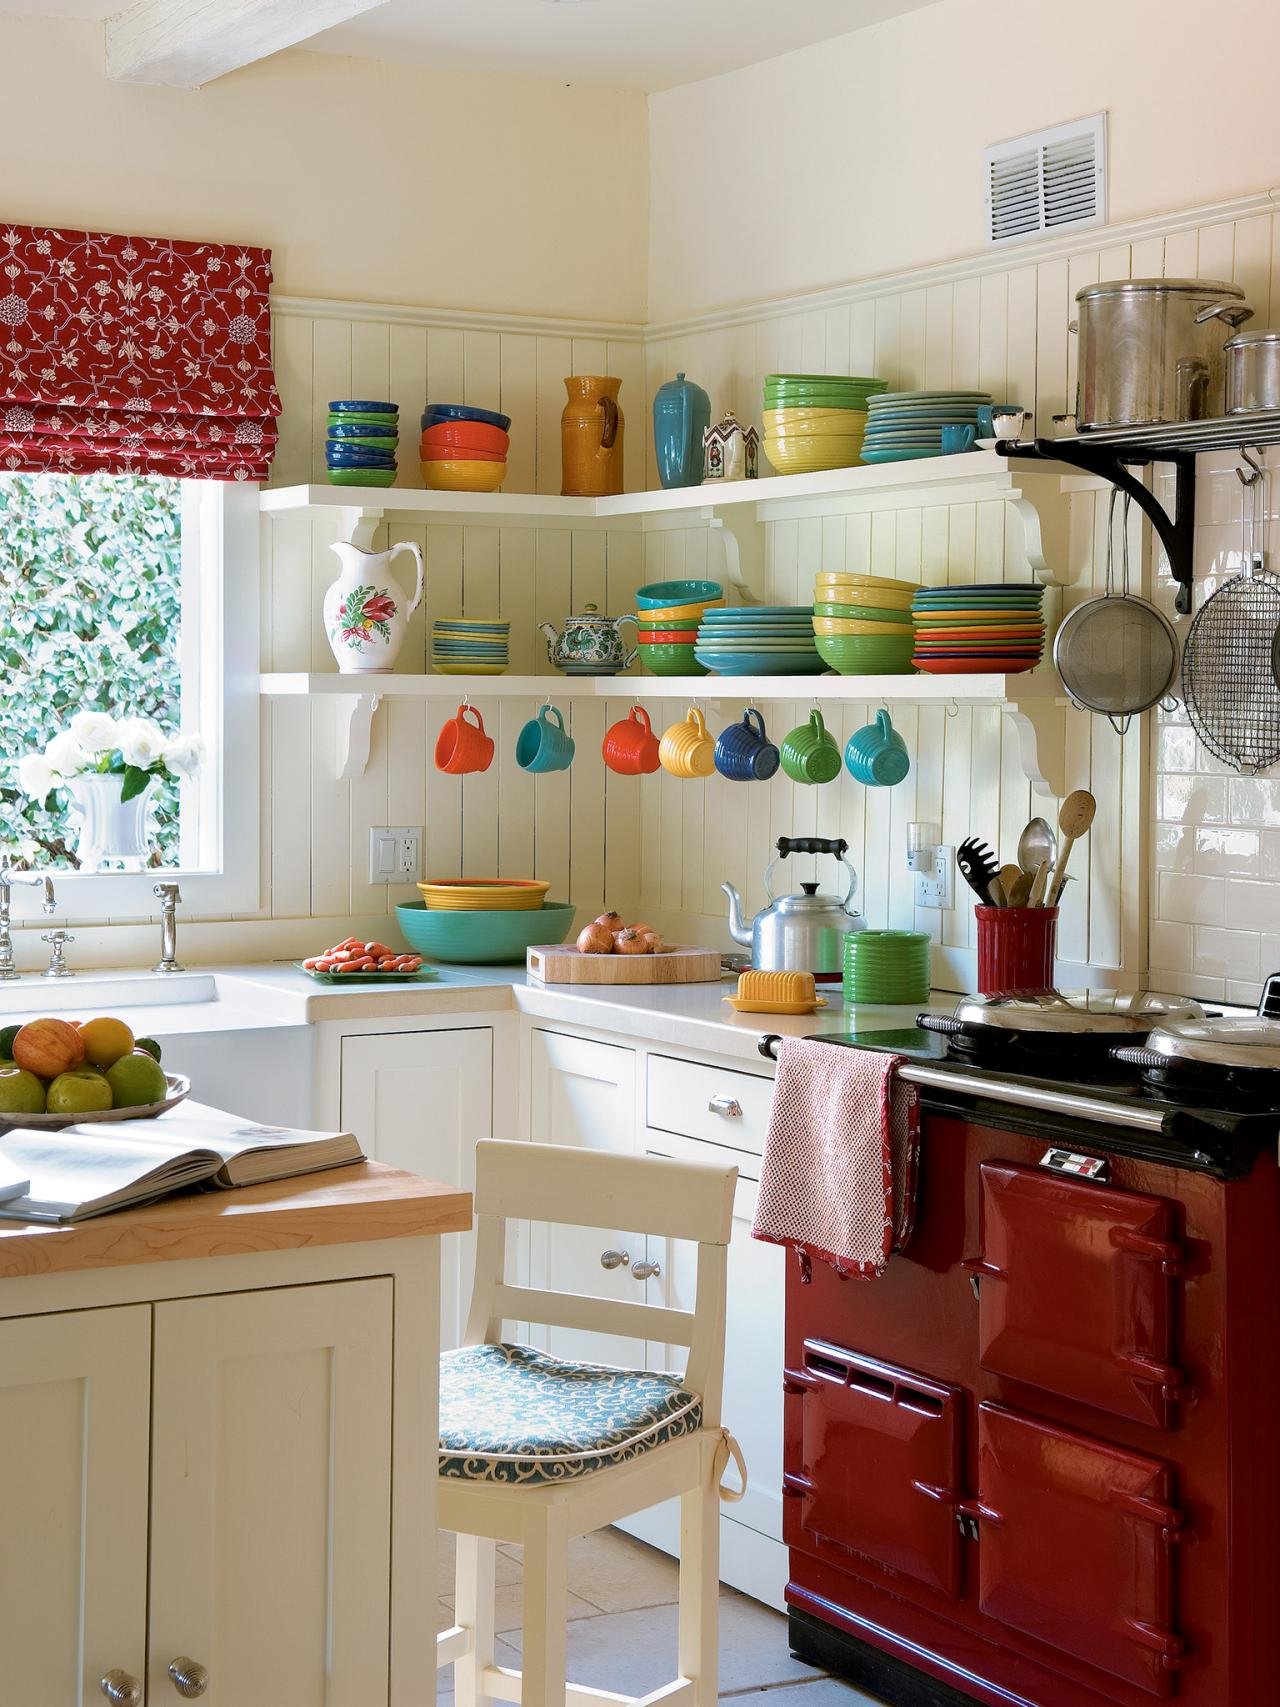 Classic, Country and Cozy Kitchen